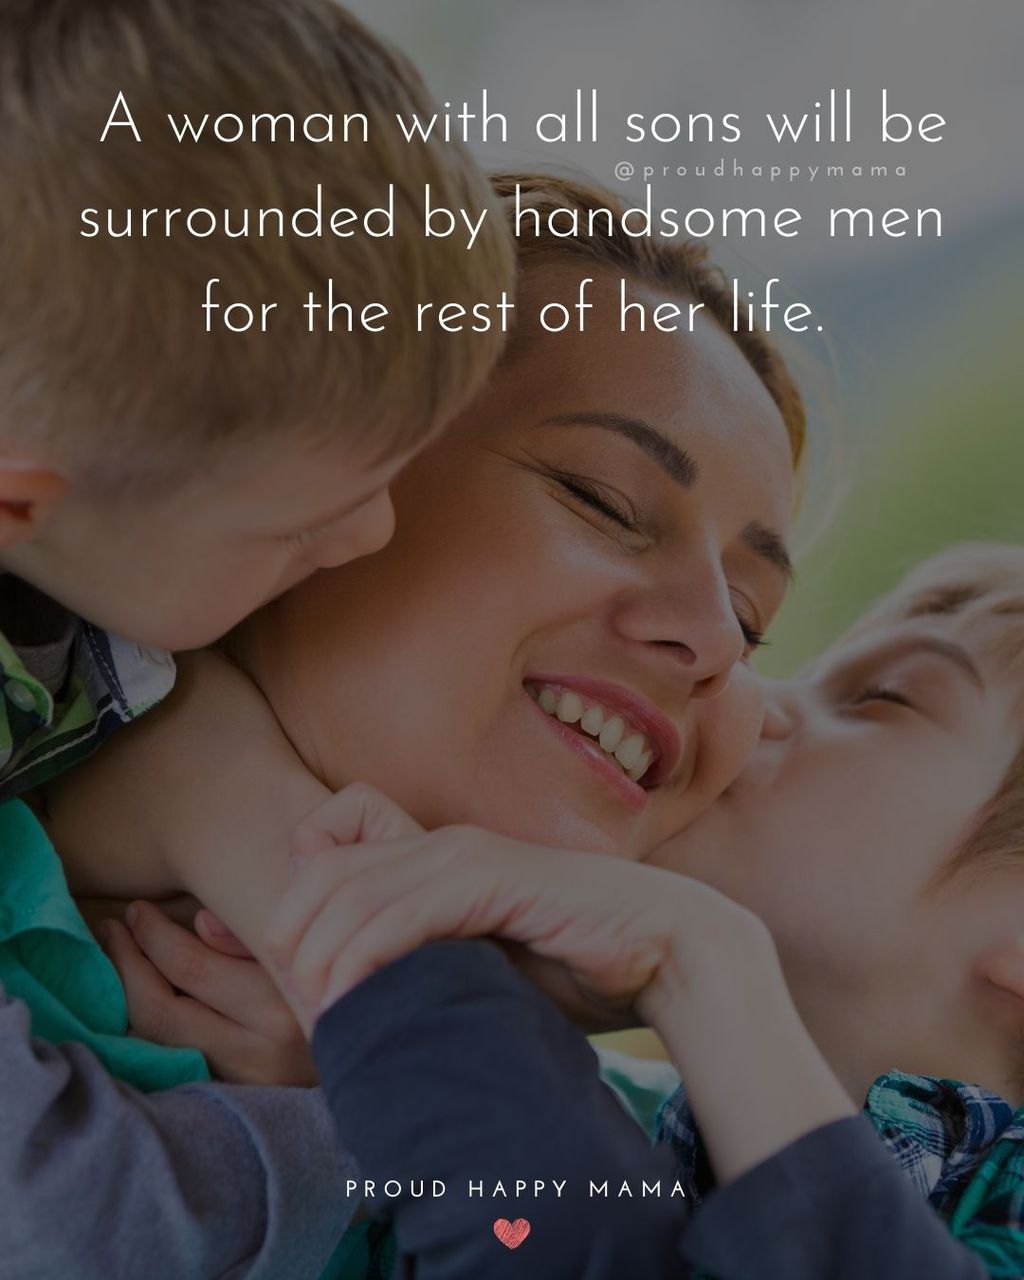 Boy Mom Quotes - A woman with all sons will be surrounded by handsome men for the rest of her life